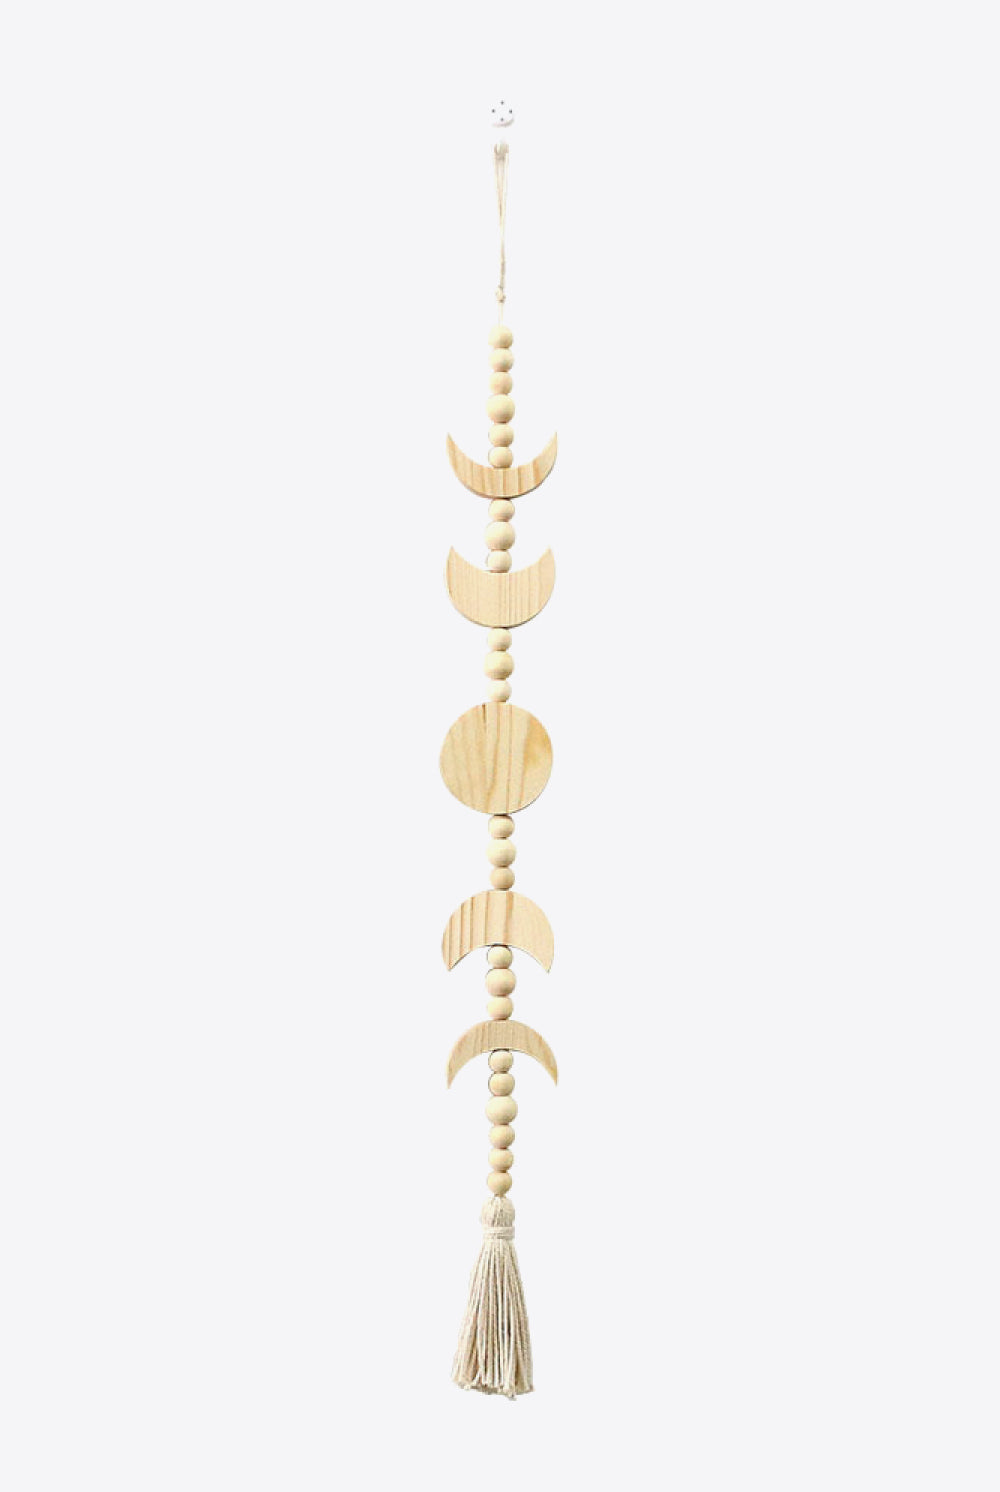 White Smoke Moon Phases Wooden Tassel Wall Hanging Home